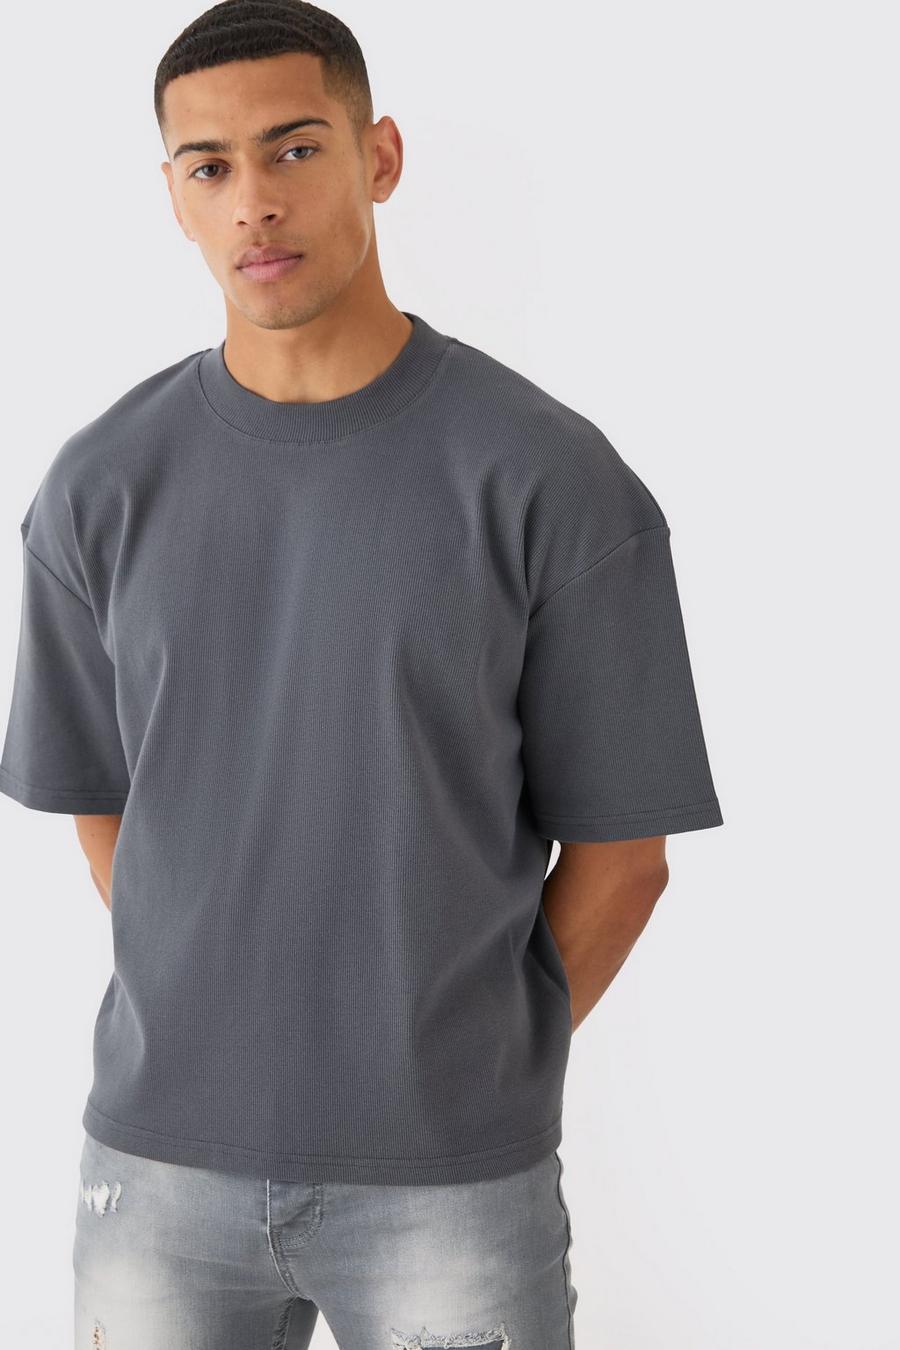 Charcoal Oversized Boxy Extended Neck Heavyweight Ribbed T-shirt